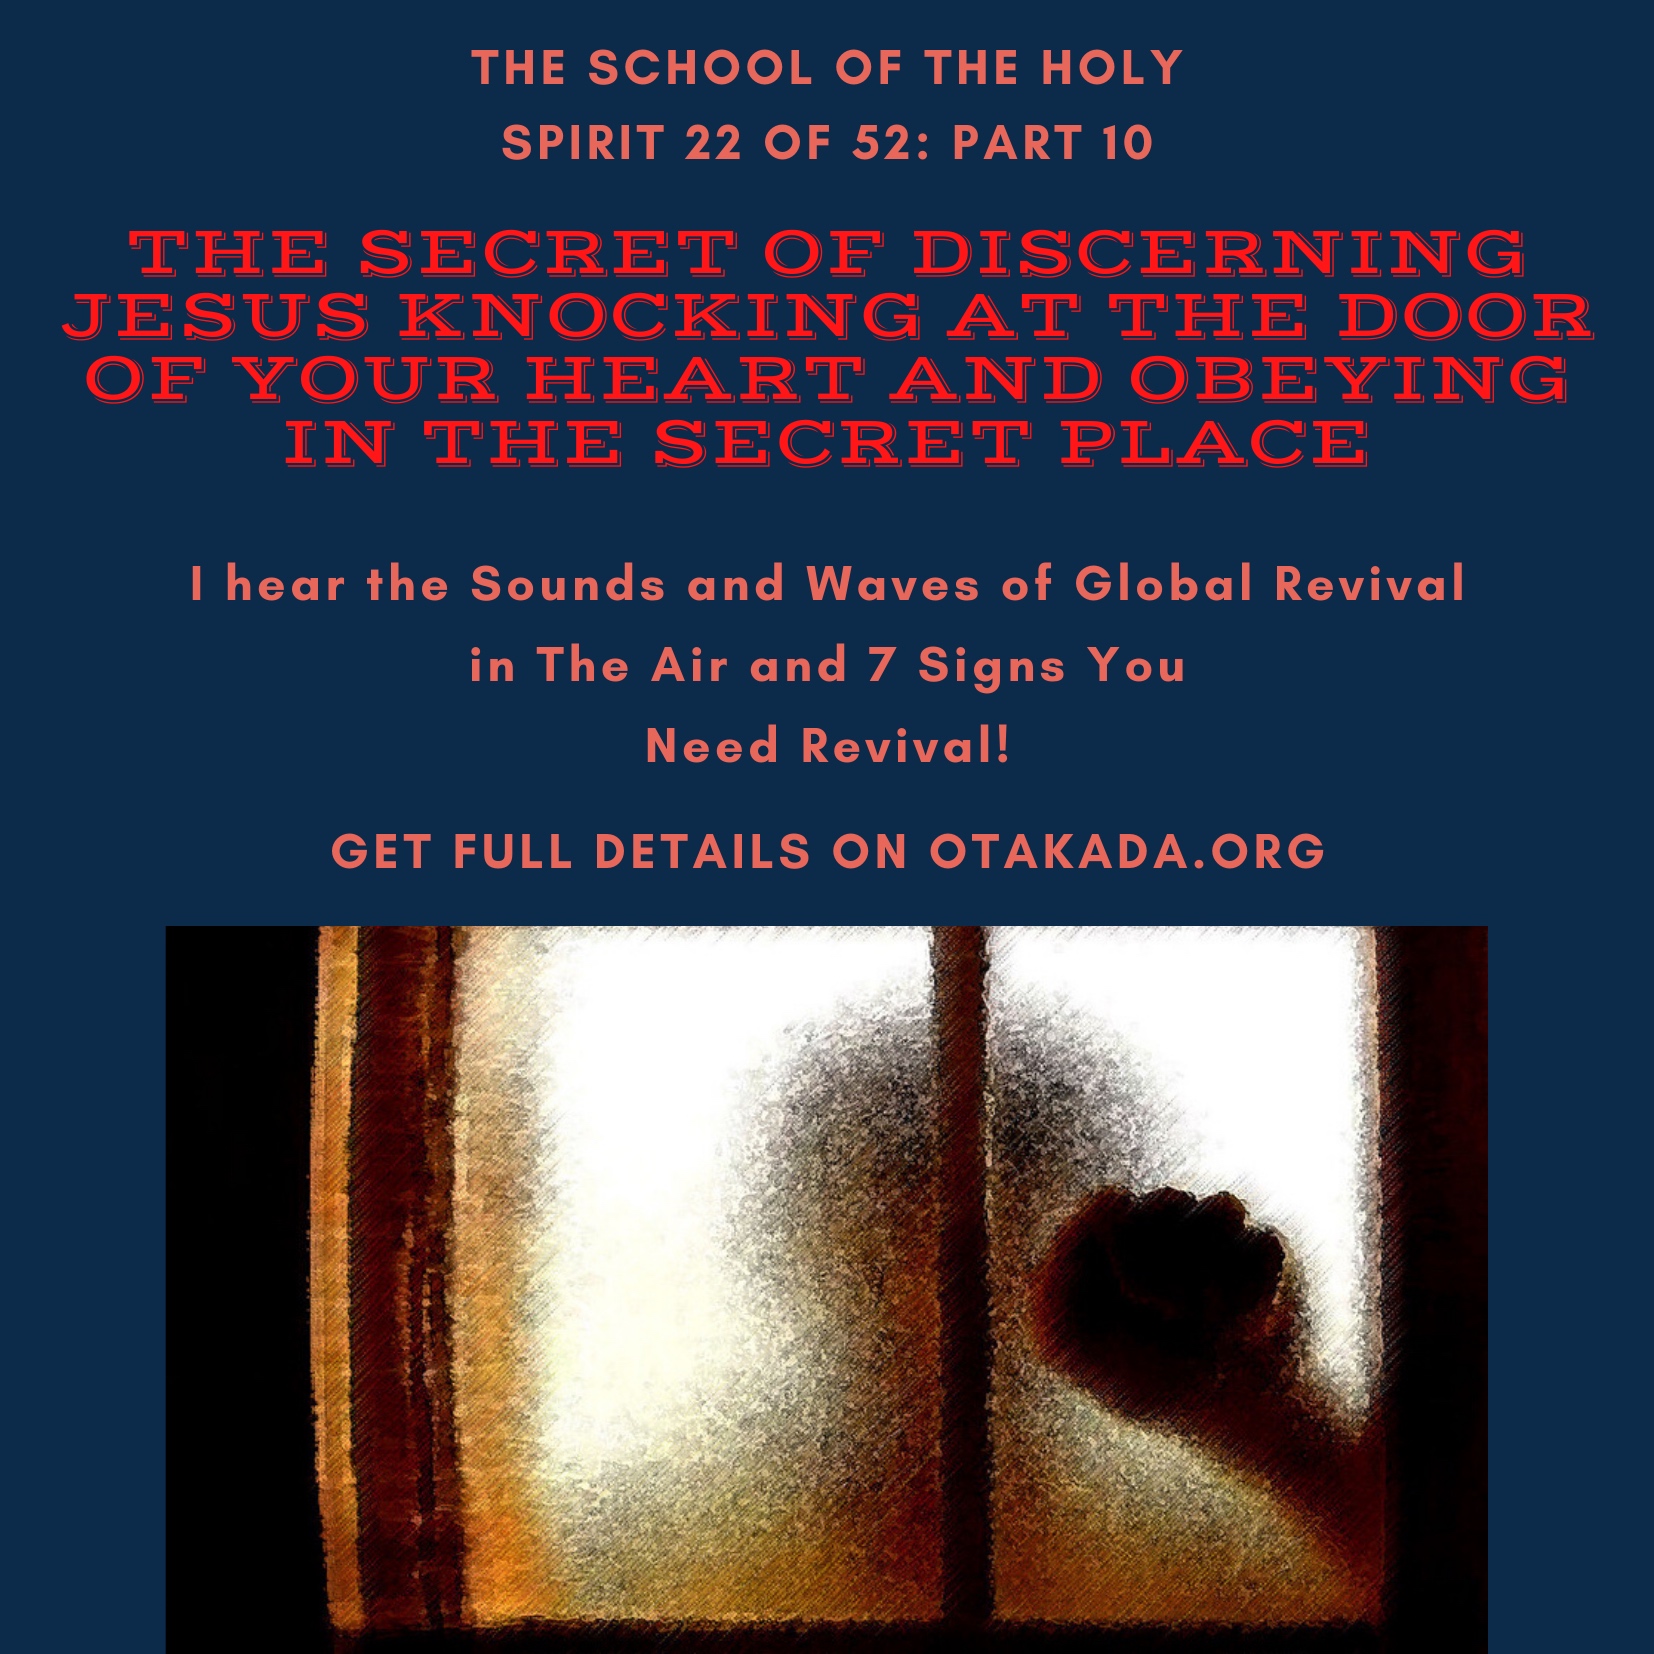 The School of the Holy Spirit 22 of 52: Part 10 – The Anatomy and Secrets of the Secret Place with God – The Secret of Discerning Jesus knocking at the Door of Your Heart and Obeying in the Secret Place + I hear the Sounds and Waves of Global Revival in The Air and 7 Signs You Need Revival!